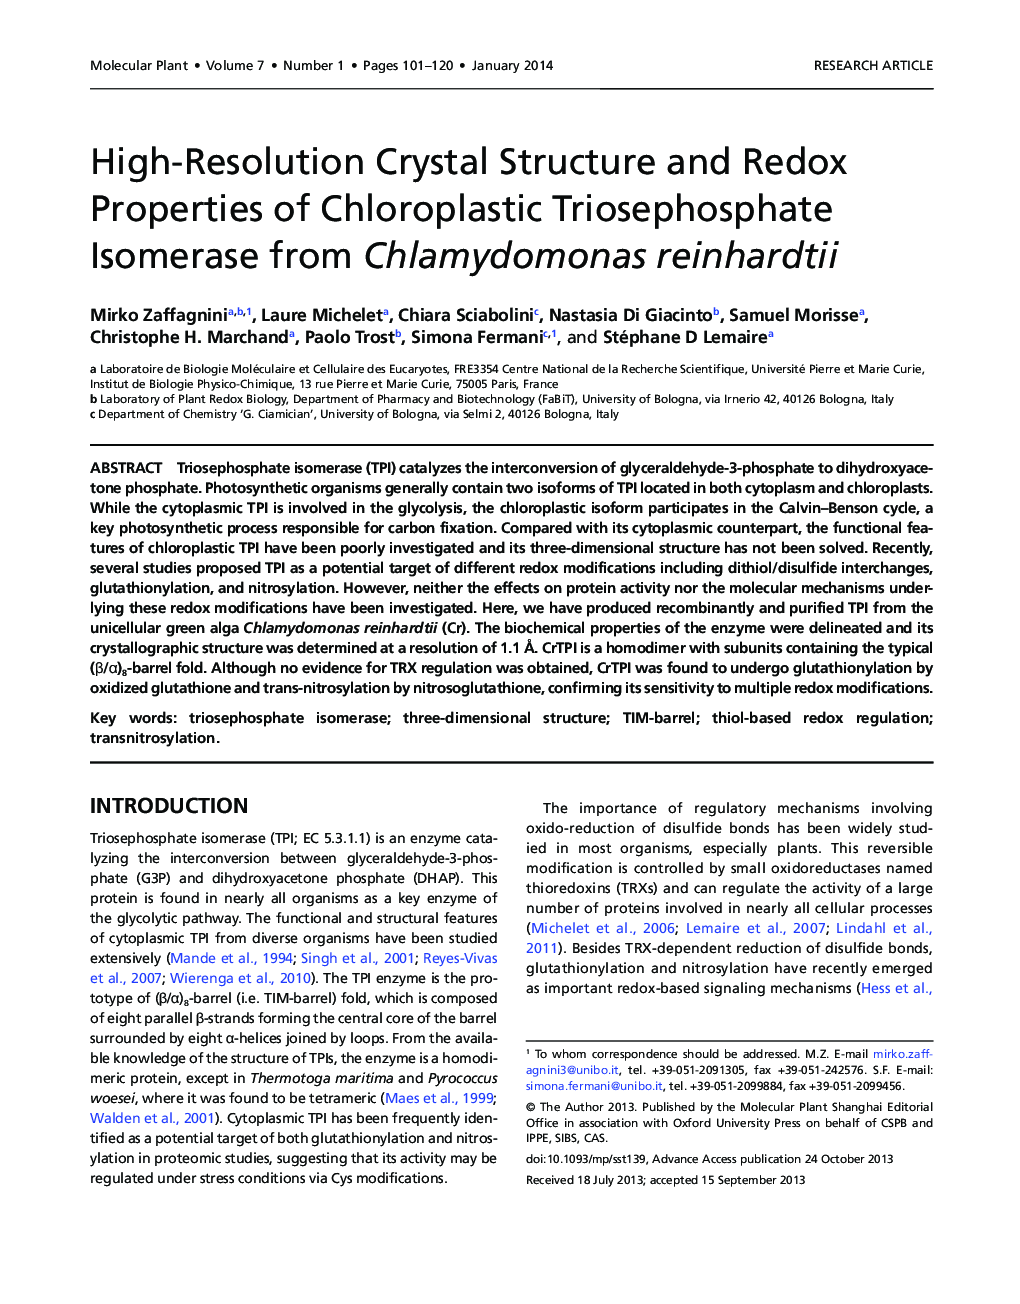 High-Resolution Crystal Structure and Redox Properties of Chloroplastic Triosephosphate Isomerase from Chlamydomonas reinhardtii 